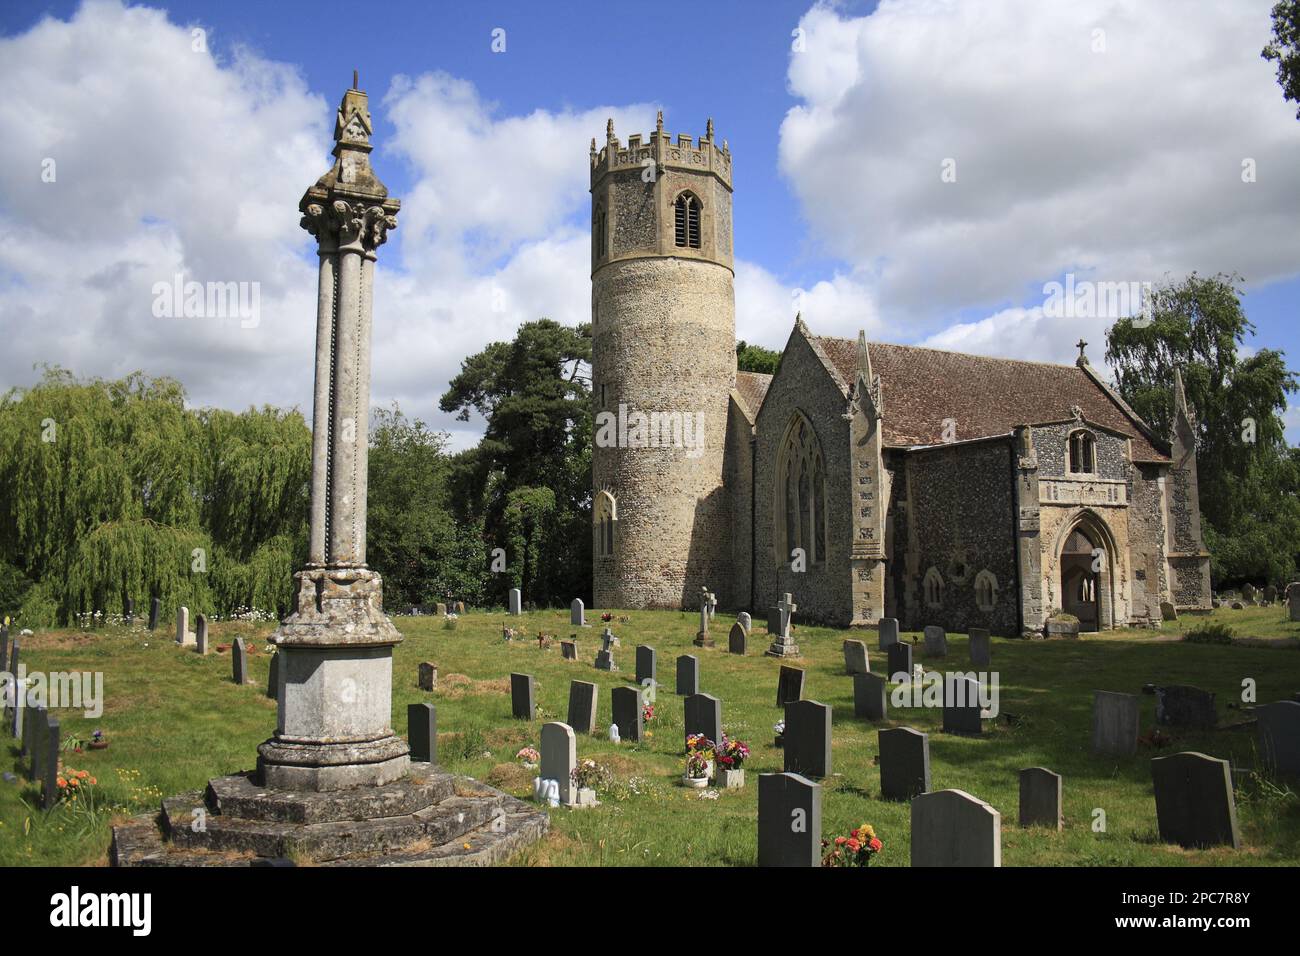 Memorial cross in graveyard, church with Norman round-tower, St. Mary's Church, Rickinghall Inferior, Suffolk, England, United Kingdom Stock Photo